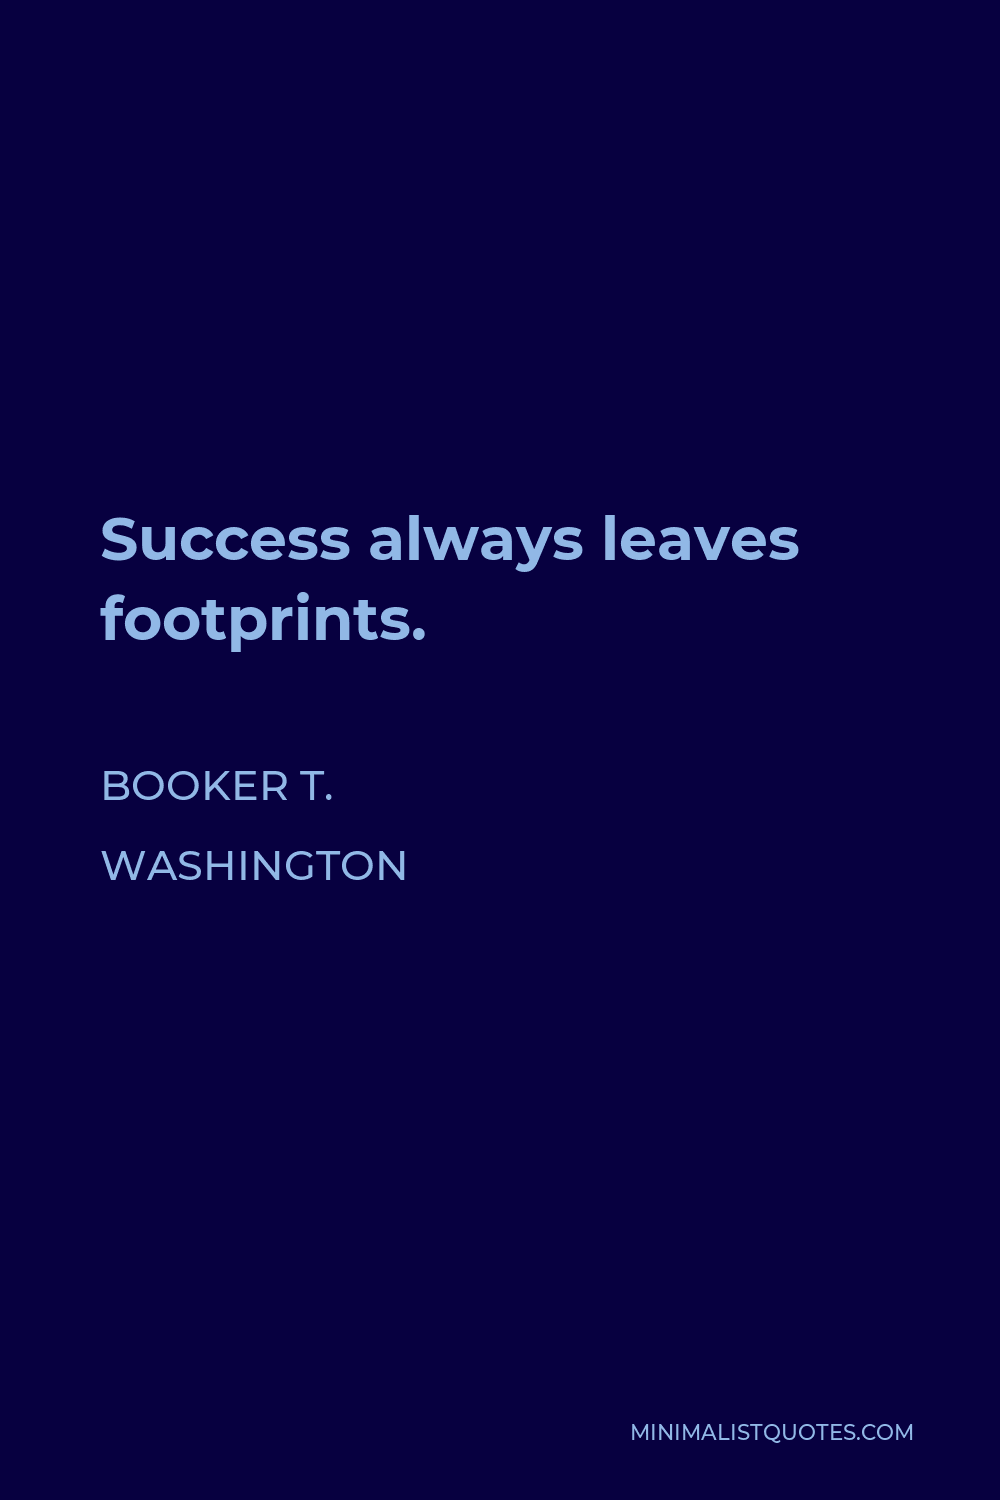 Booker T. Washington Quote - Success always leaves footprints.